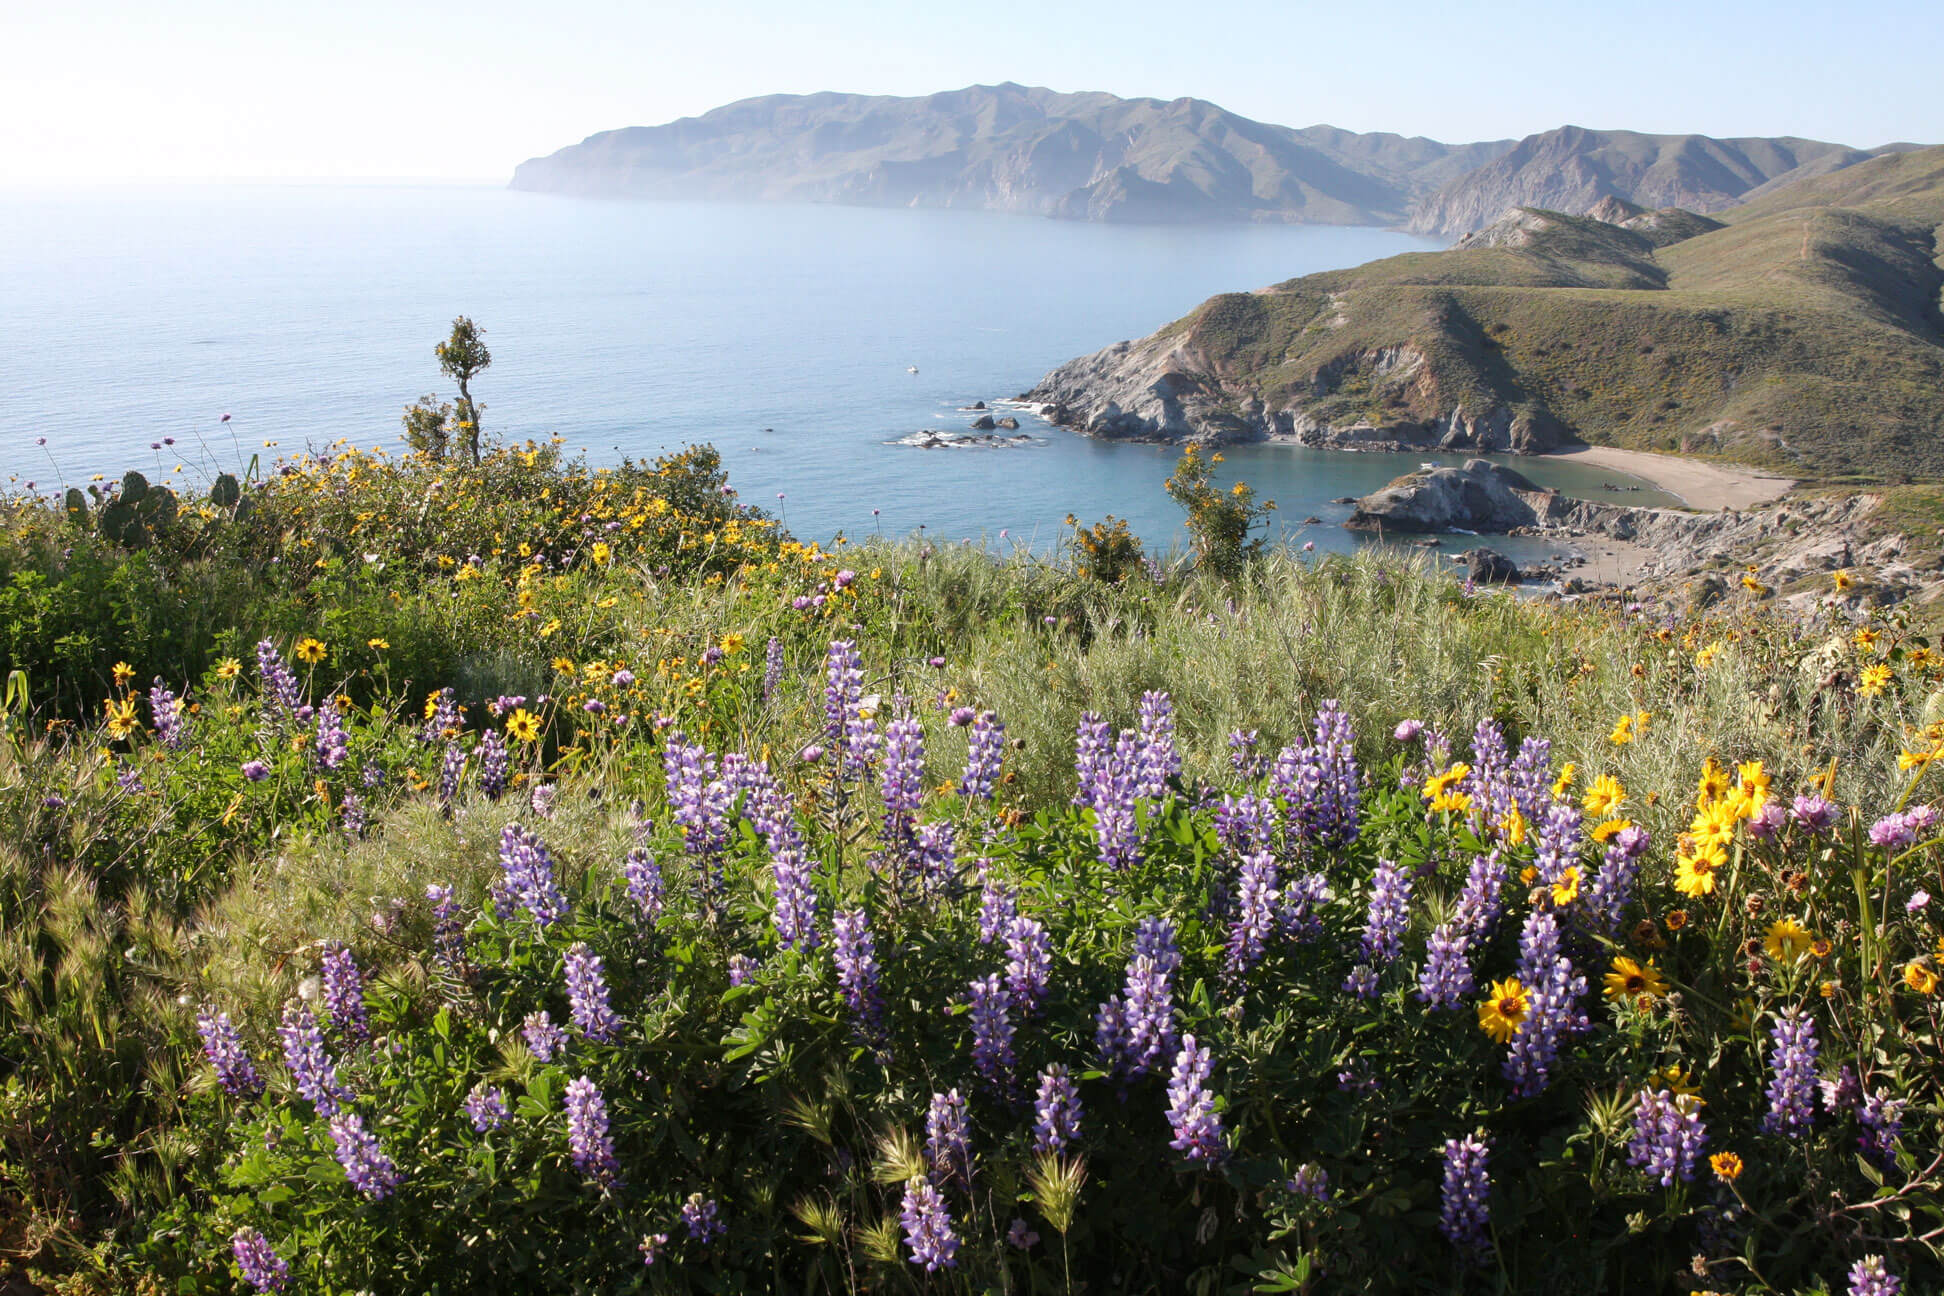 Drone photo of the coastline of Catalina Island and San Pedro Channel with purple and yellow wildflowers in the foreground